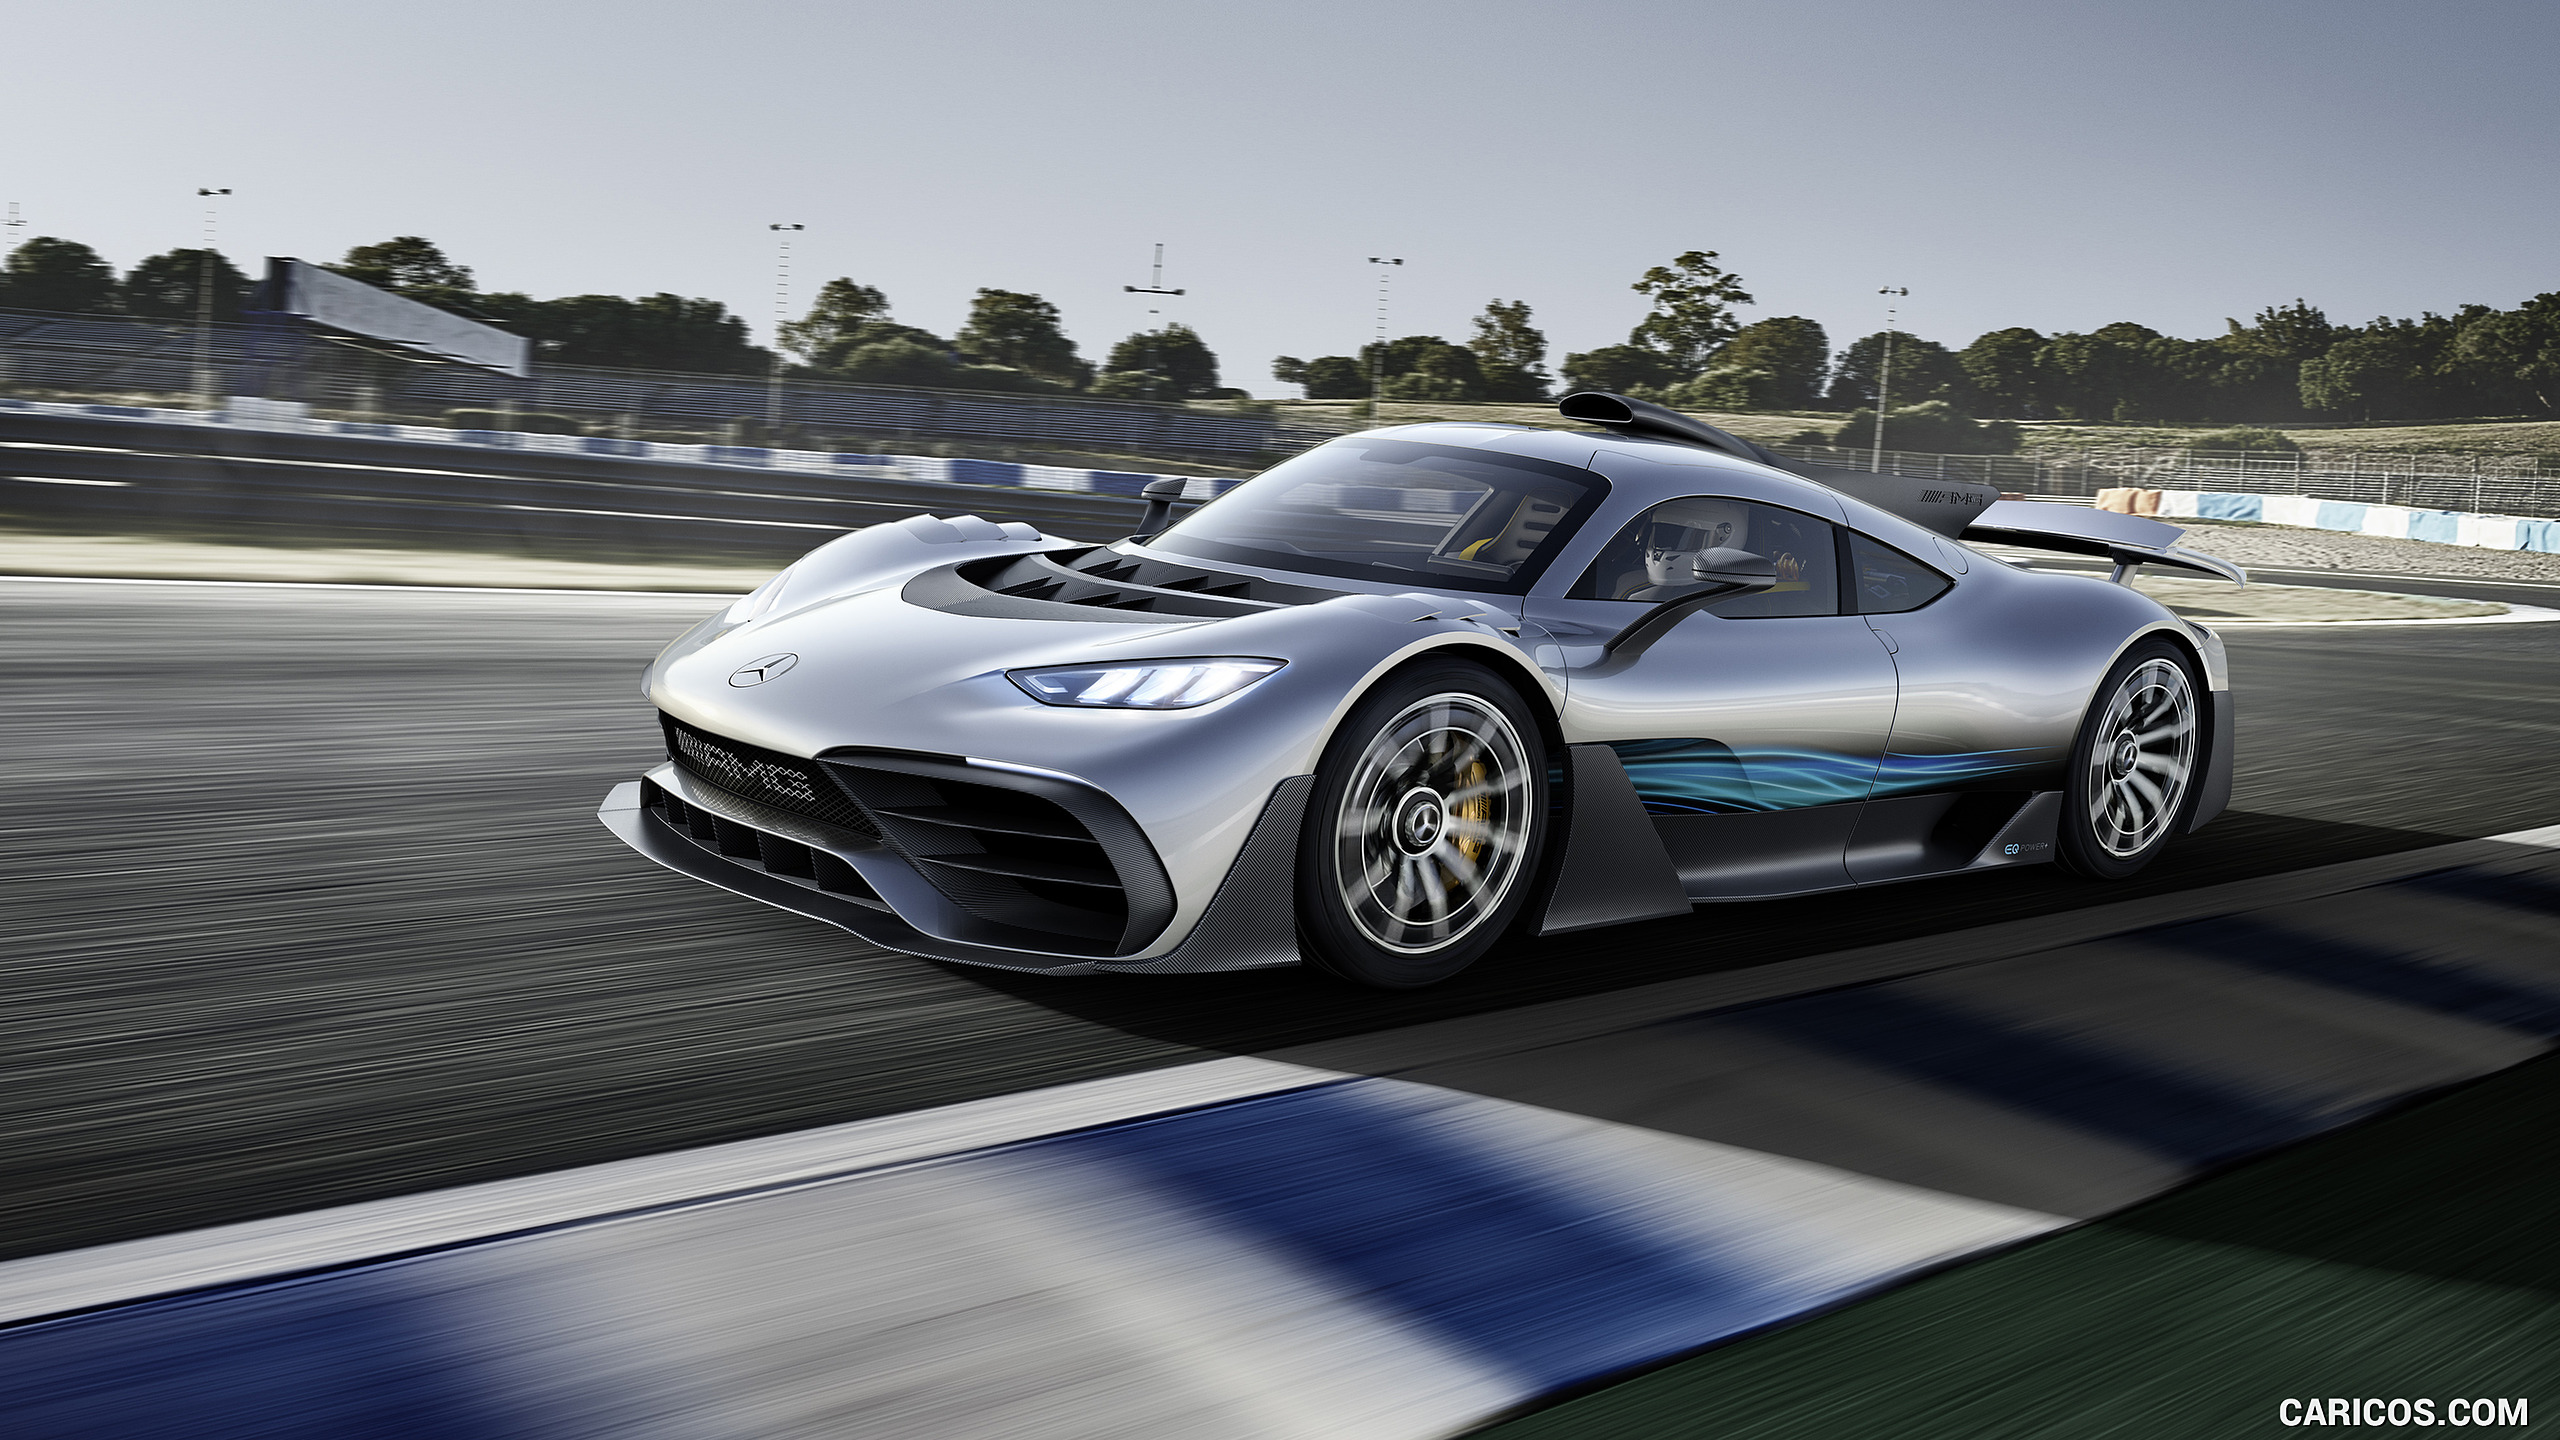 2017 Mercedes-AMG Project ONE - Front Three-Quarter, #1 of 13